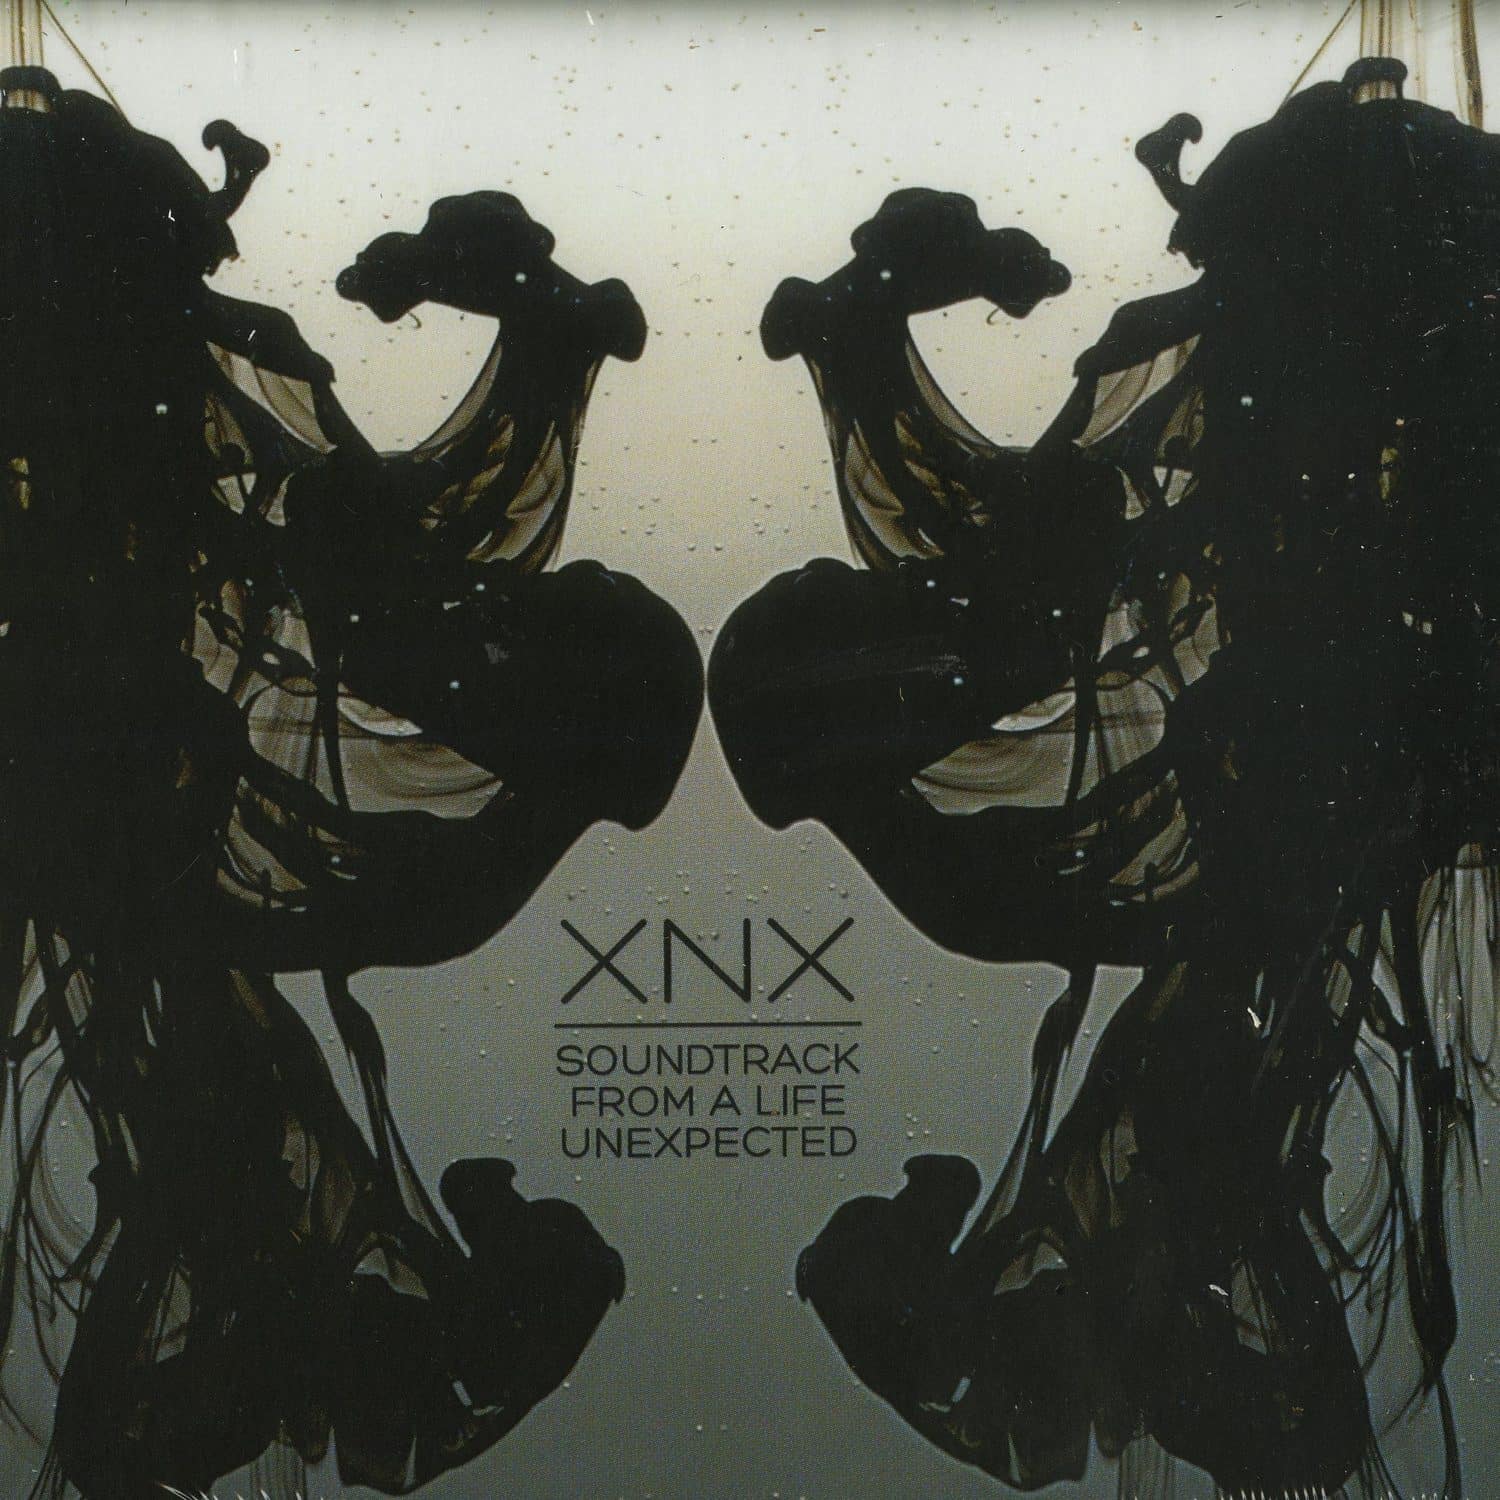 Xnx - SOUNDTRACK FROM A LIFE UNEXPECTED 